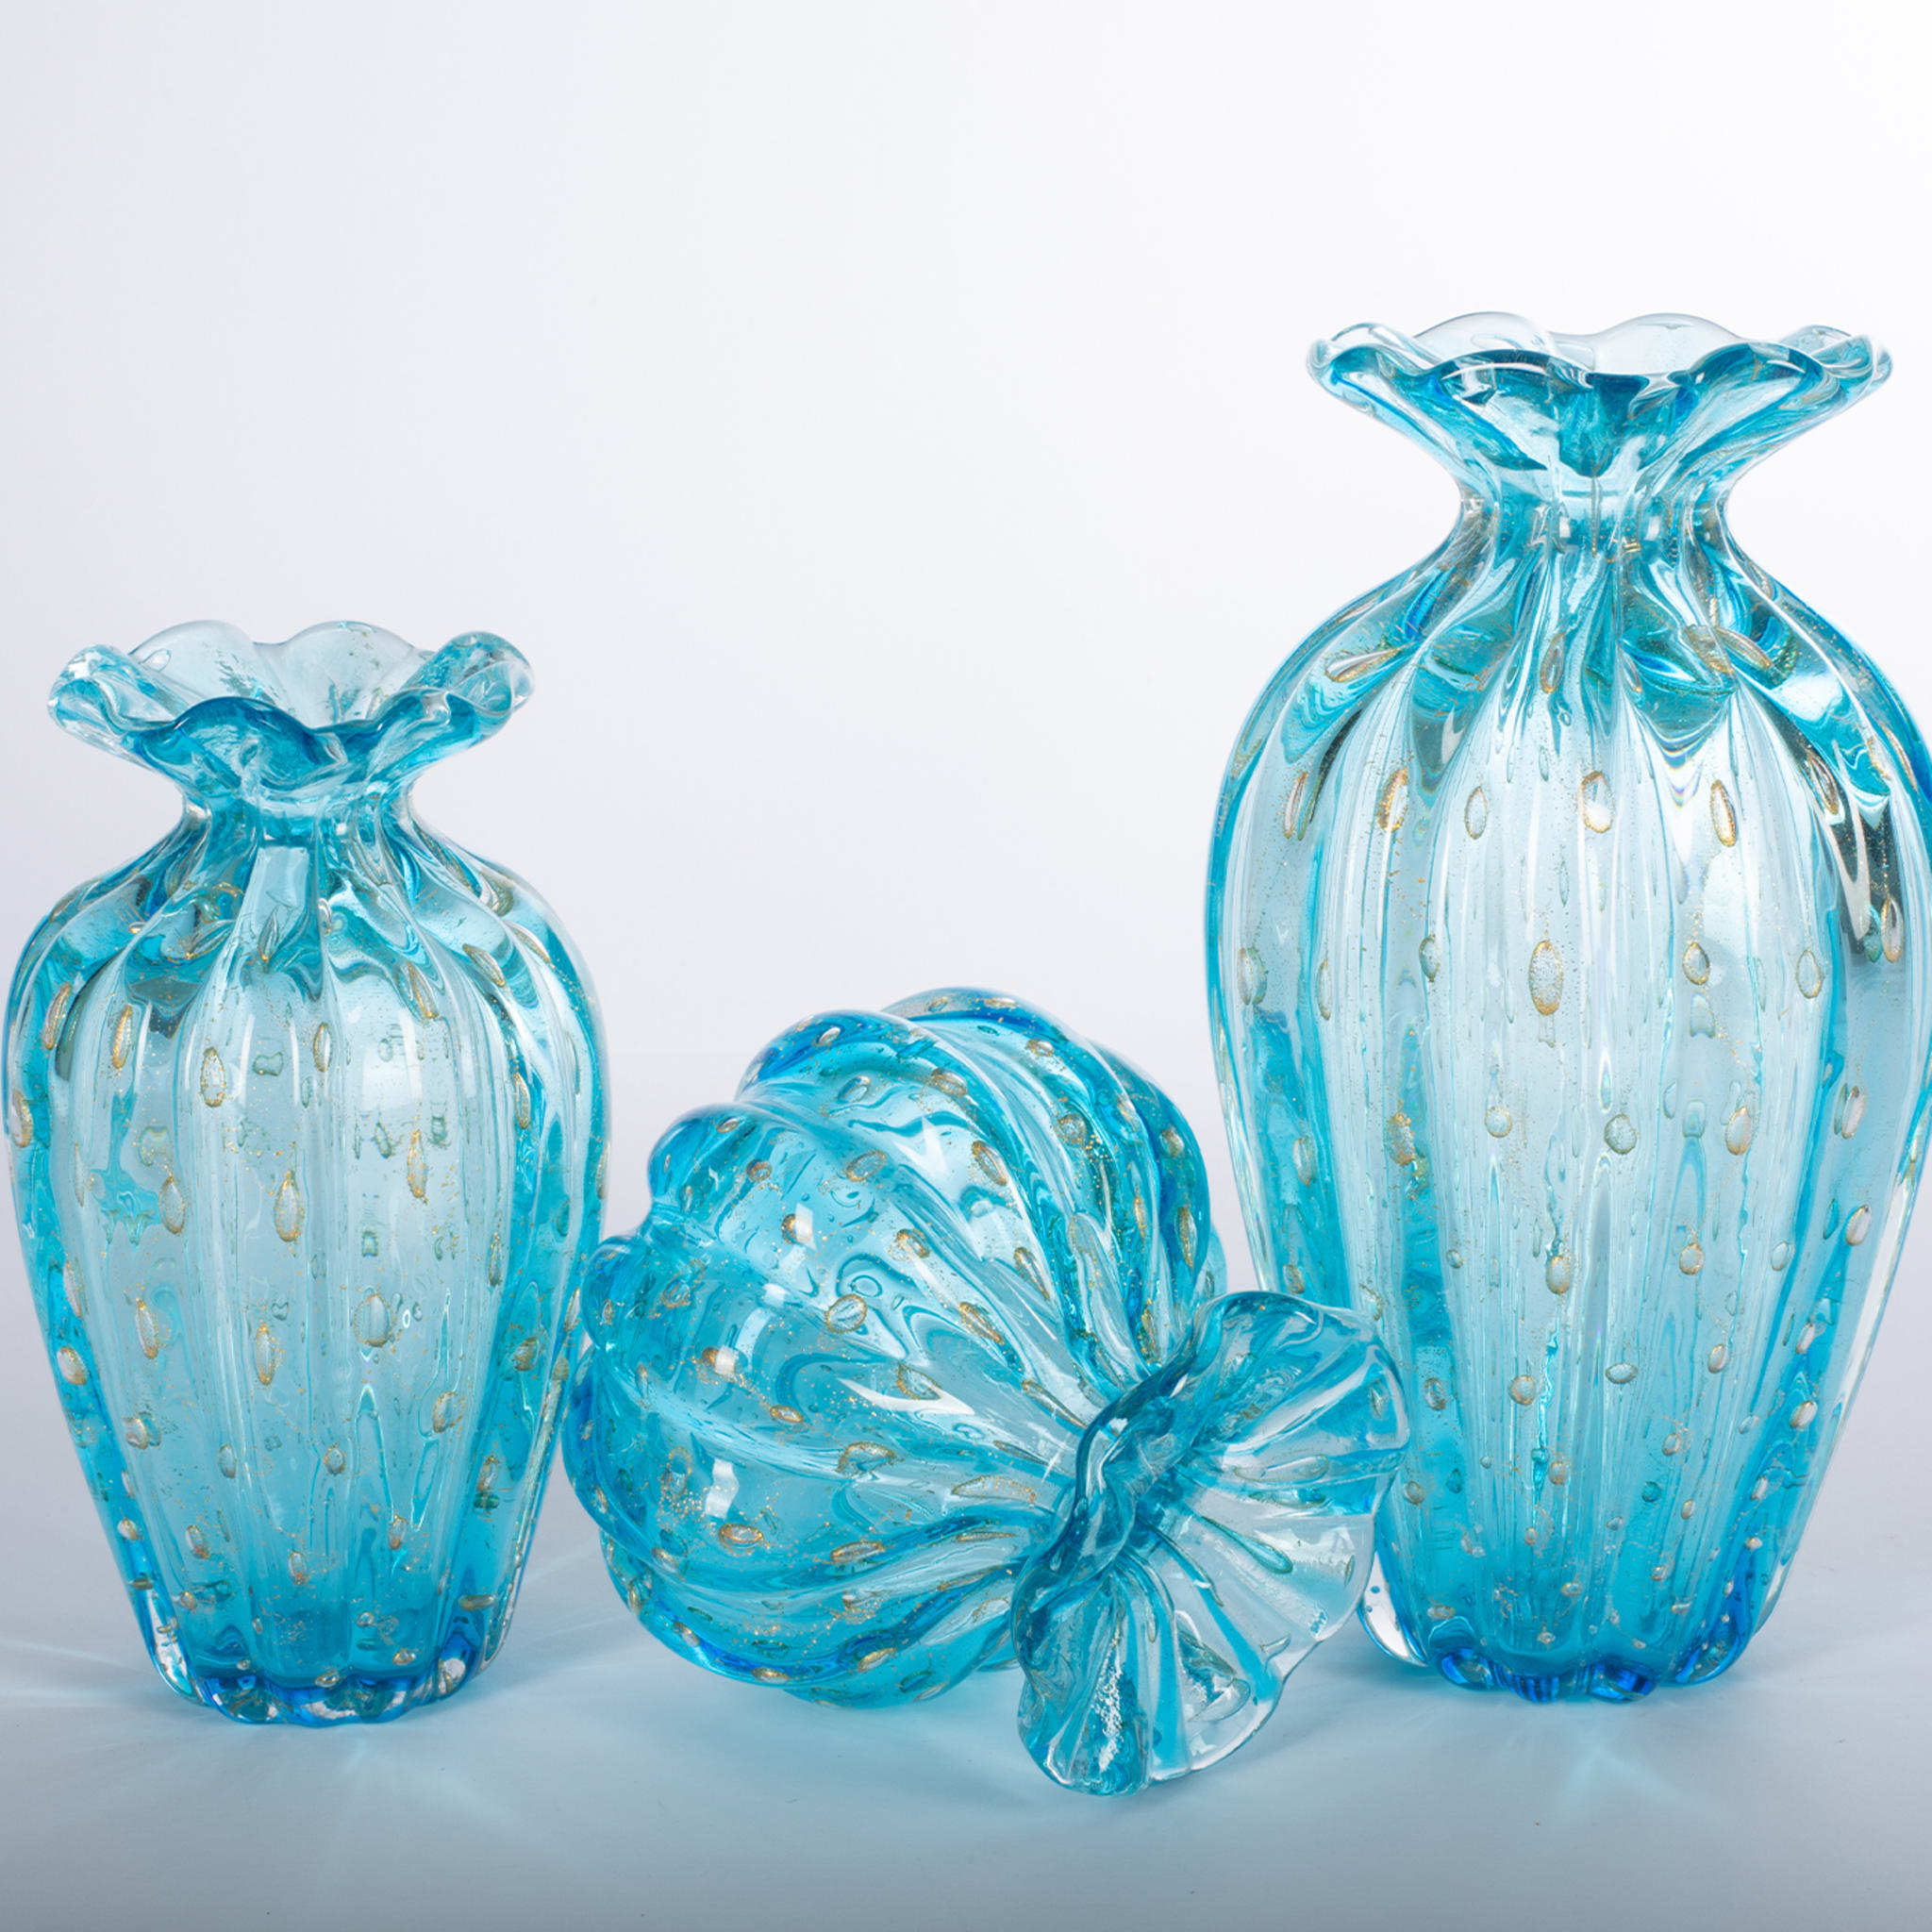 1950 Light-Blue Set of 3 Vases with Gold Bubbles - Alternative view 1